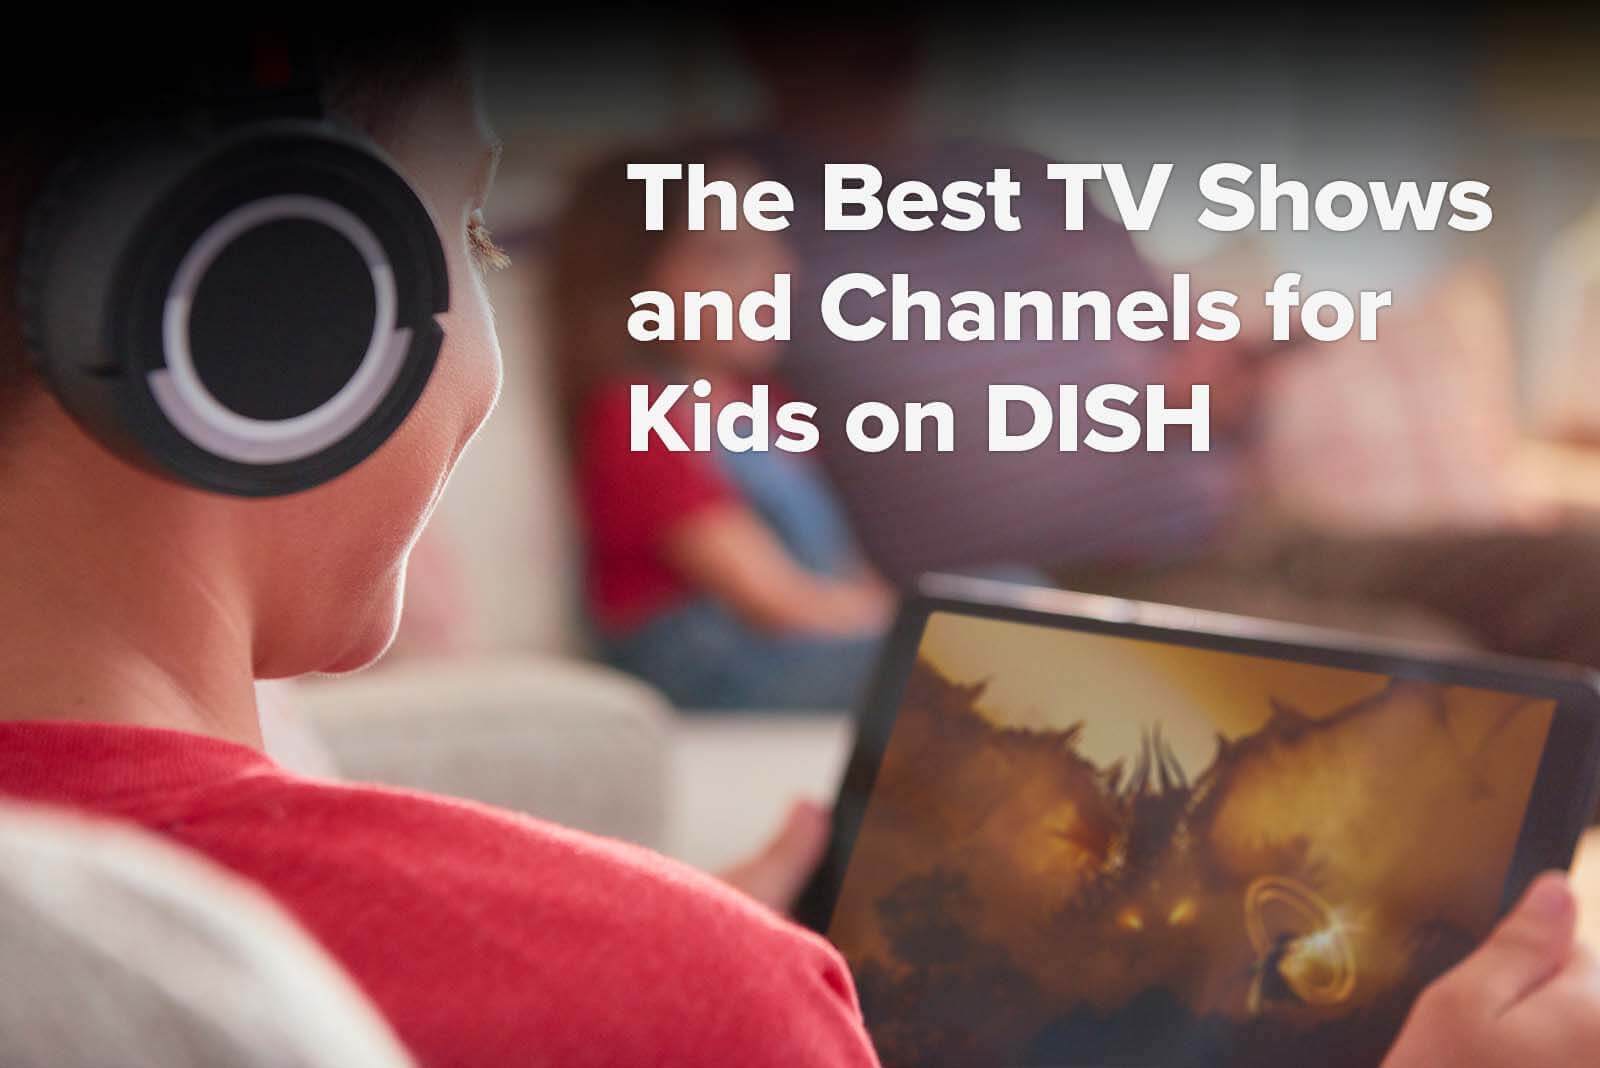 Best TV Shows and Channels for Kids on DISH